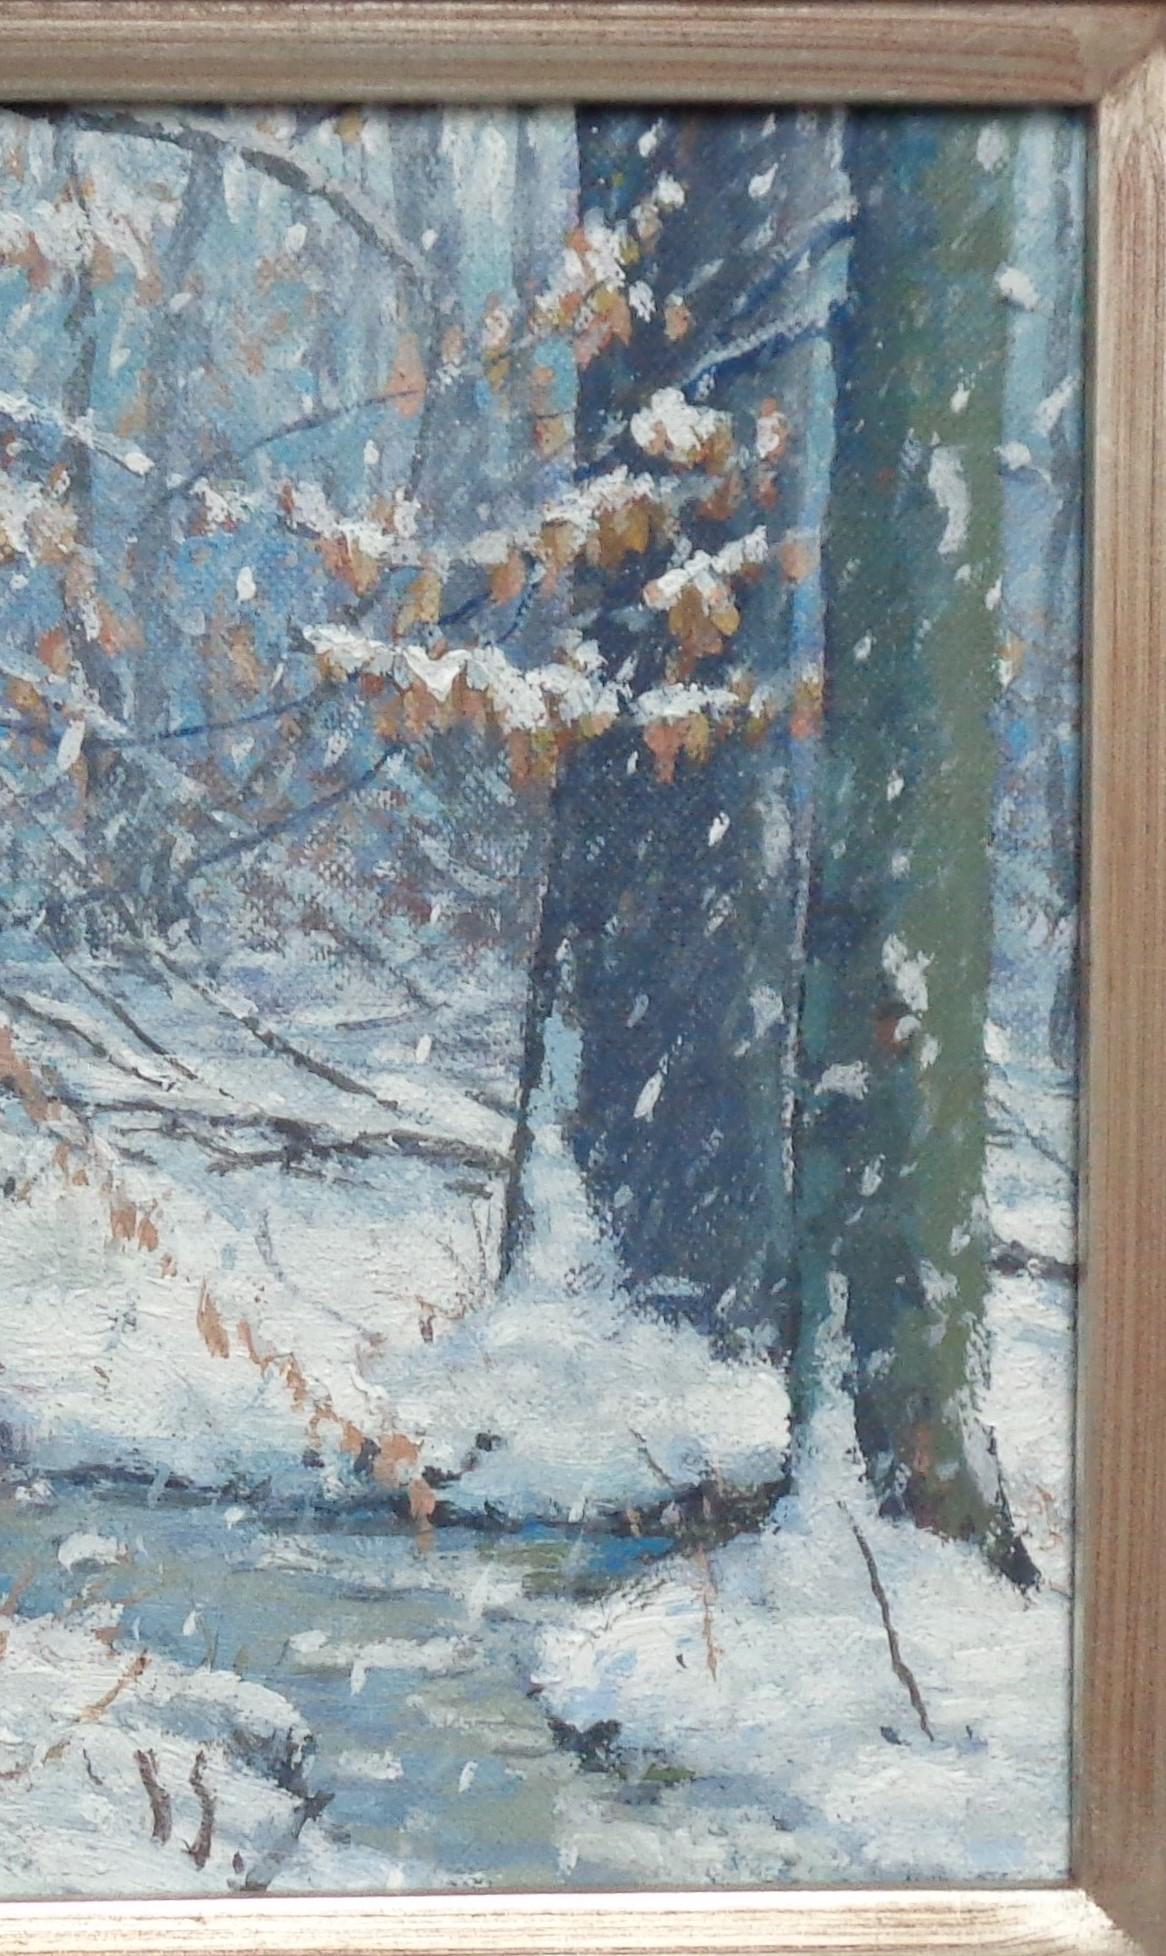  Contemporary Landscape Winter Snow Scene Oil Painting by Michael Budden For Sale 4